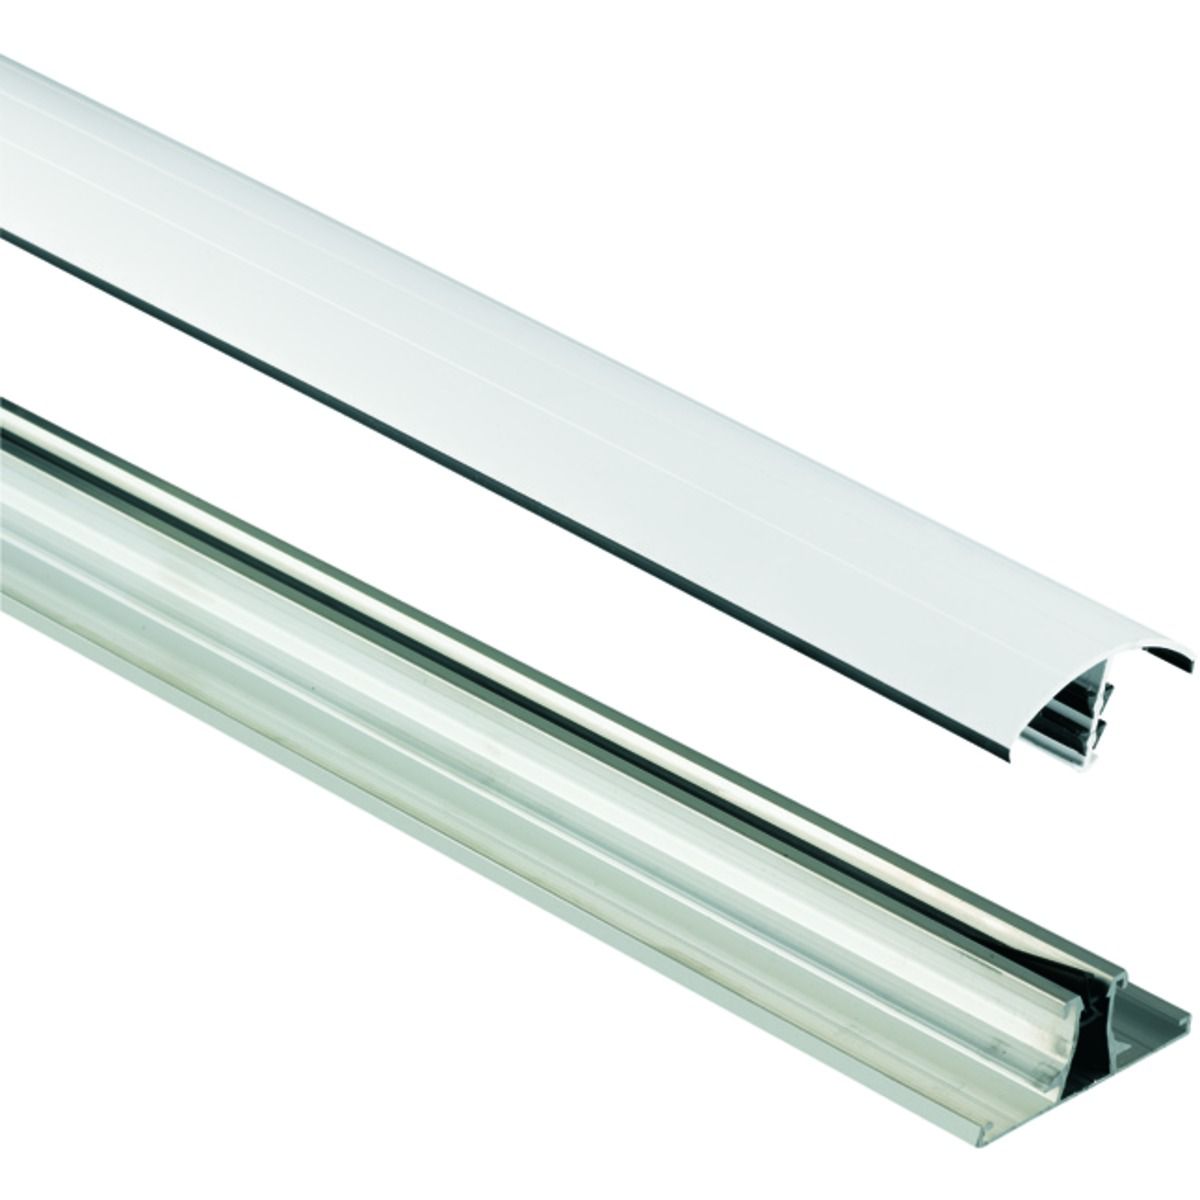 Image of Wickes White Universal Glazing Bar for Polycarbonate Sheets - 2.5m